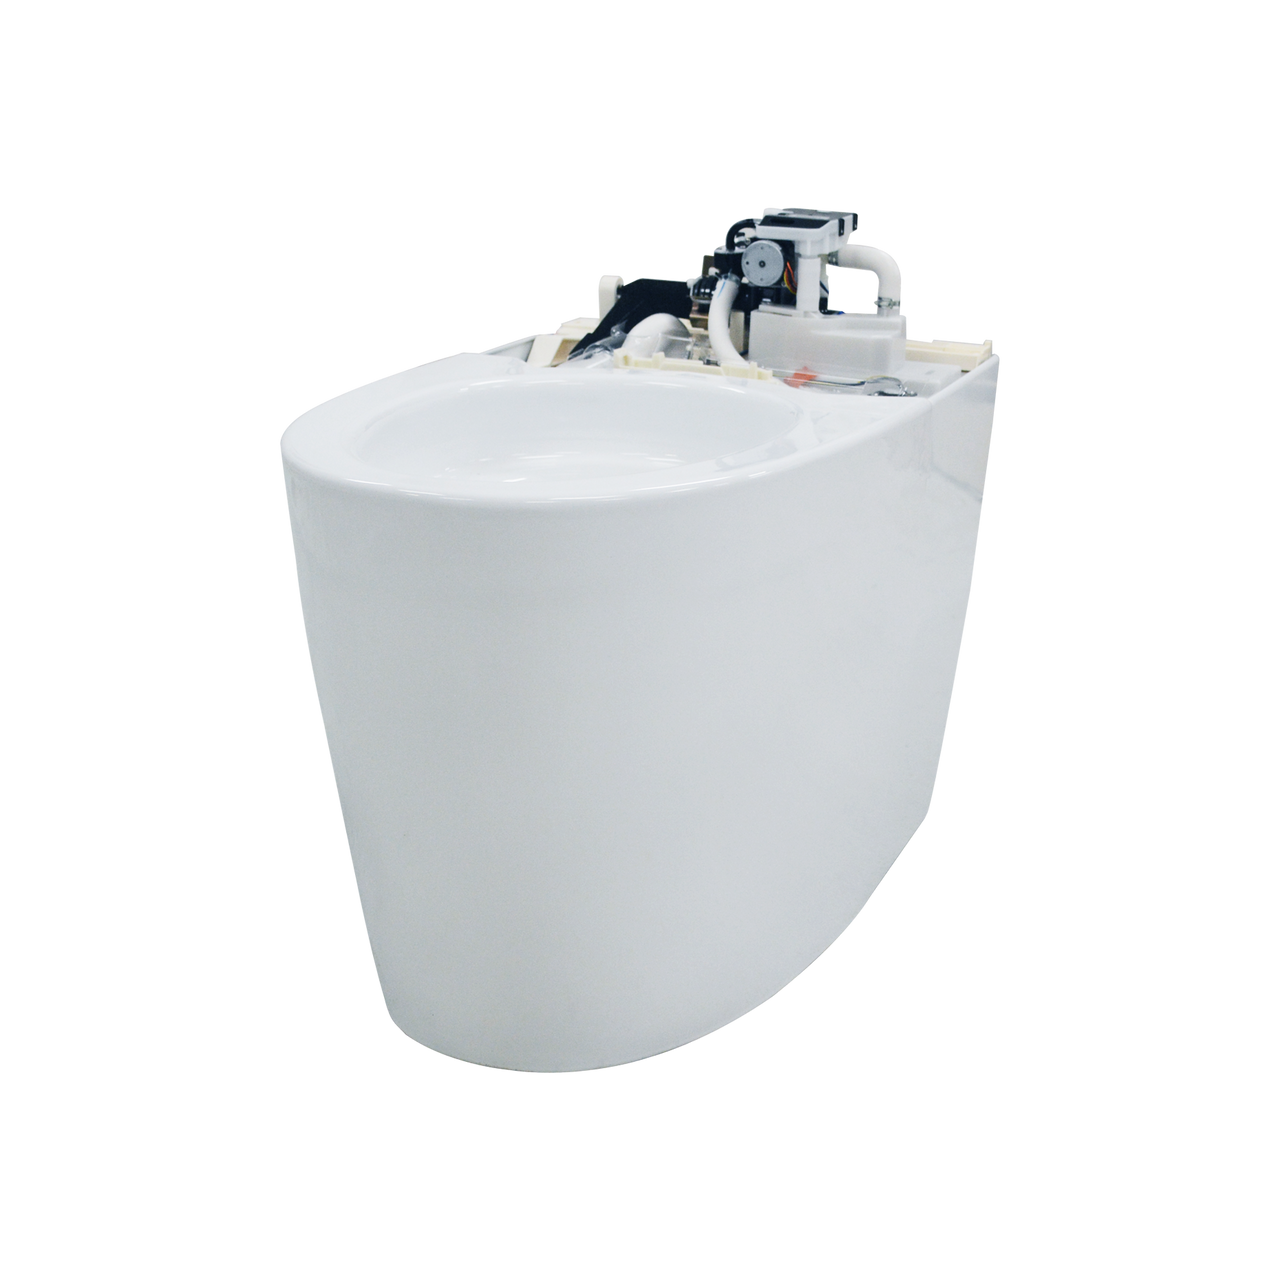 NEOREST Dual Flush 1.0 or 0.8 GPF Elongated Toilet Bowl for AH and RH, - CT989CUMFG#01 - BNGBath